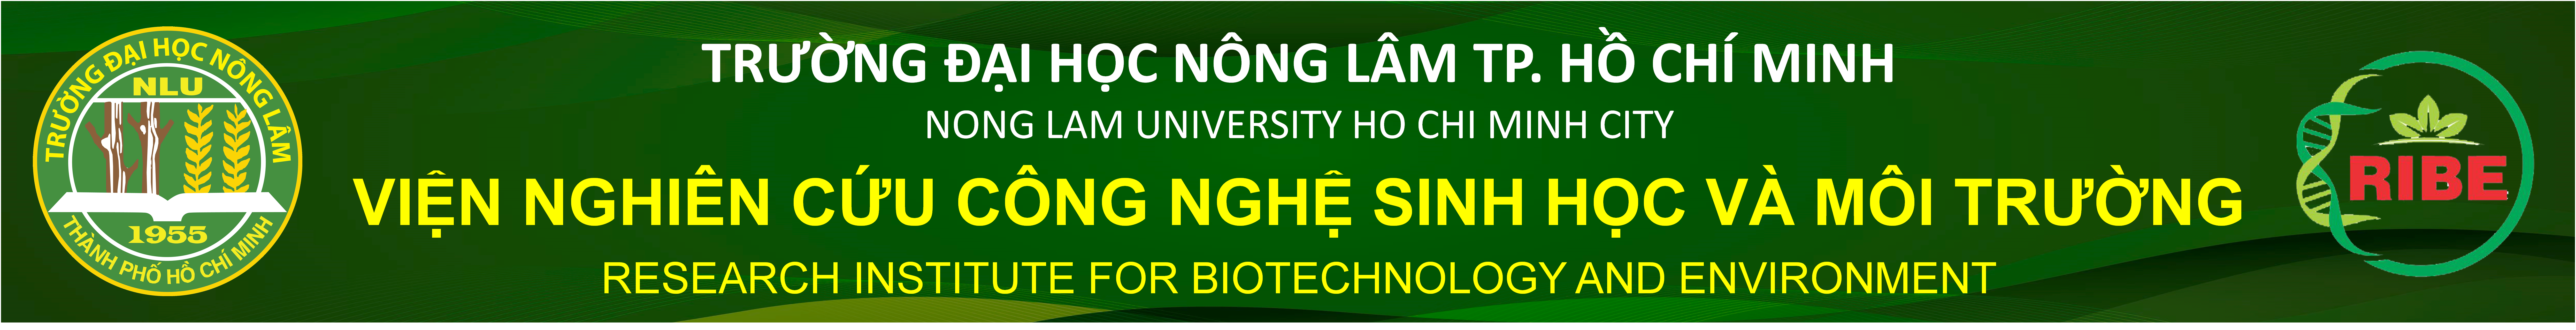 Vien Nghien Cuu Cong Nghe Sinh hoc va Moi Truong - DH Nong Lam TP.HCM, RESEARCH INSTITUTE FOR BIOTECHNOLOGY AND ENVIRONMENT- NONG LAM University